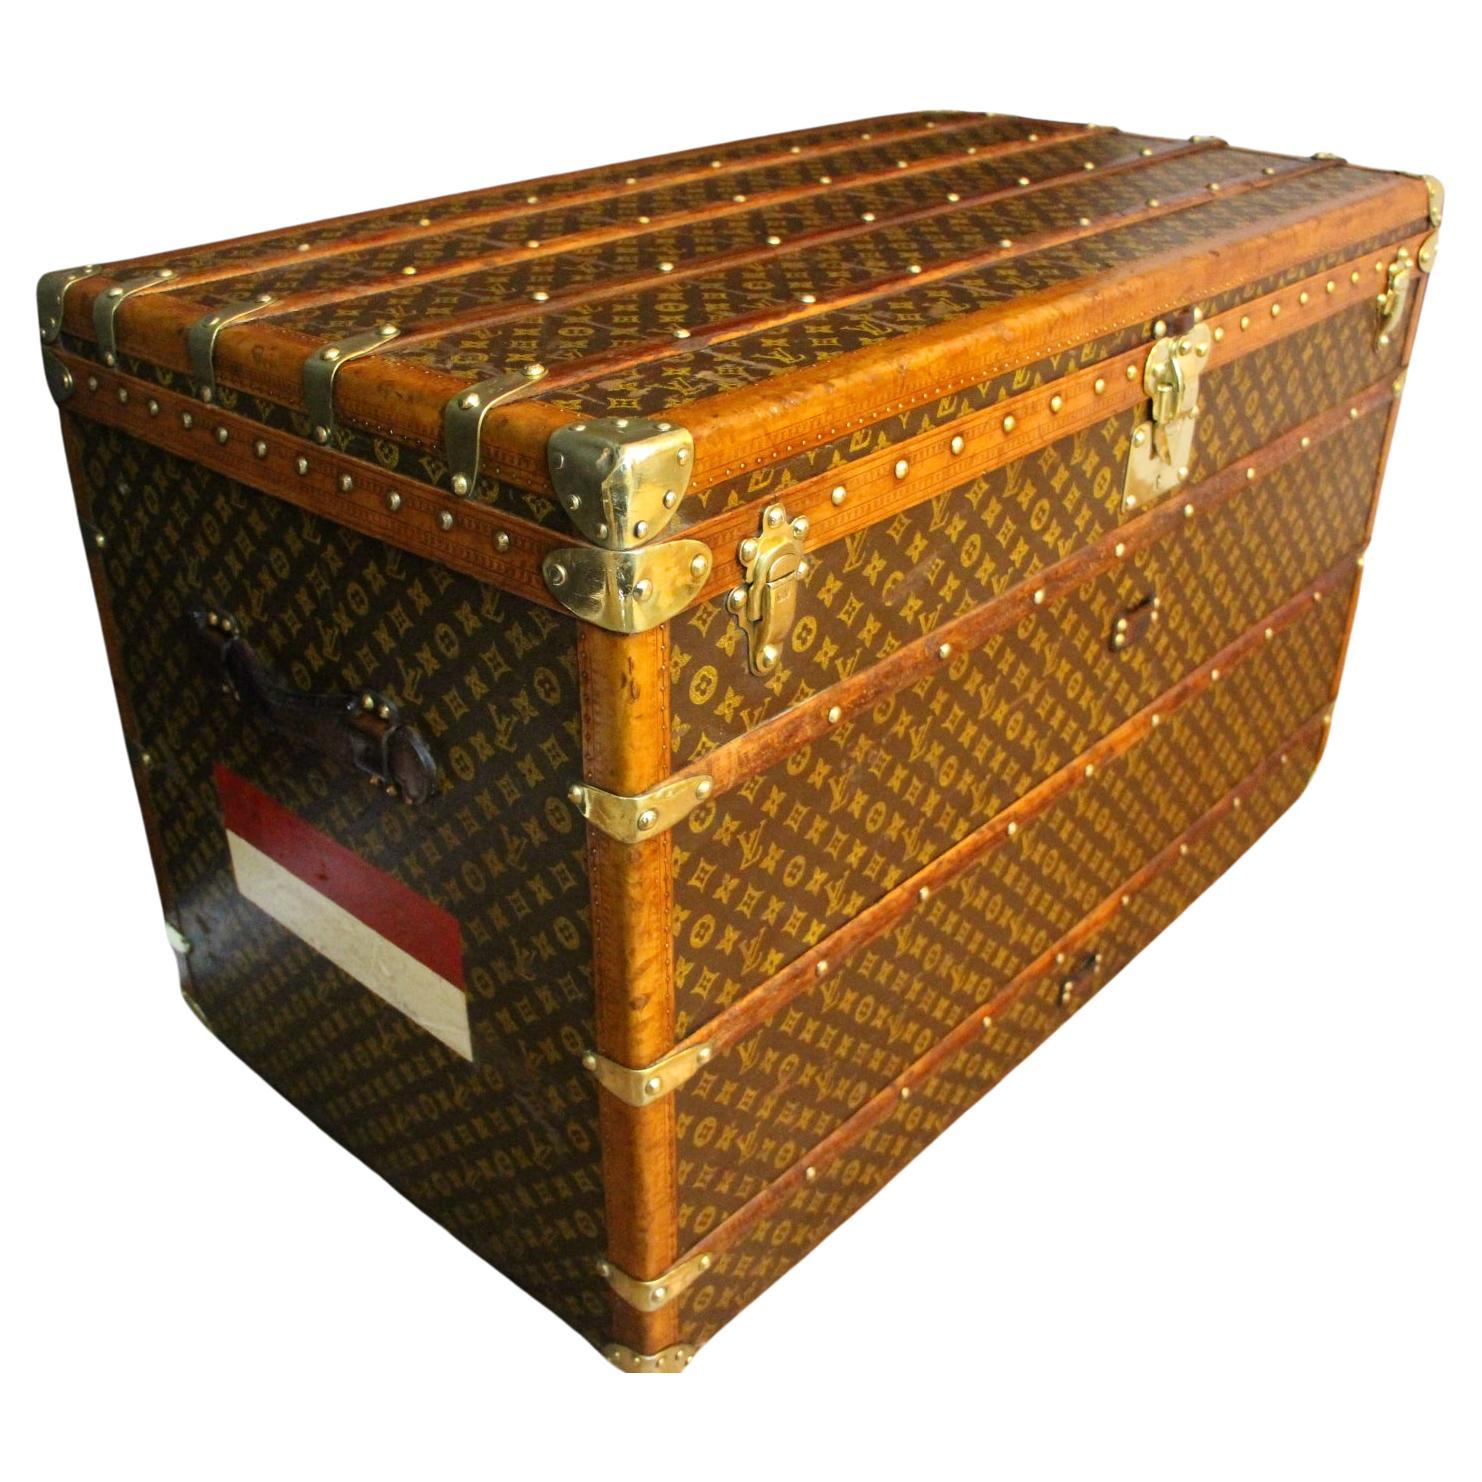 This superb Louis Vuitton steamer trunk features stenciled monogram canvas, honey color lozine trim, LV stamped solid brass locks and studs as well as solid brass side handles and brass corners. Its customized painted red and white stribes add a